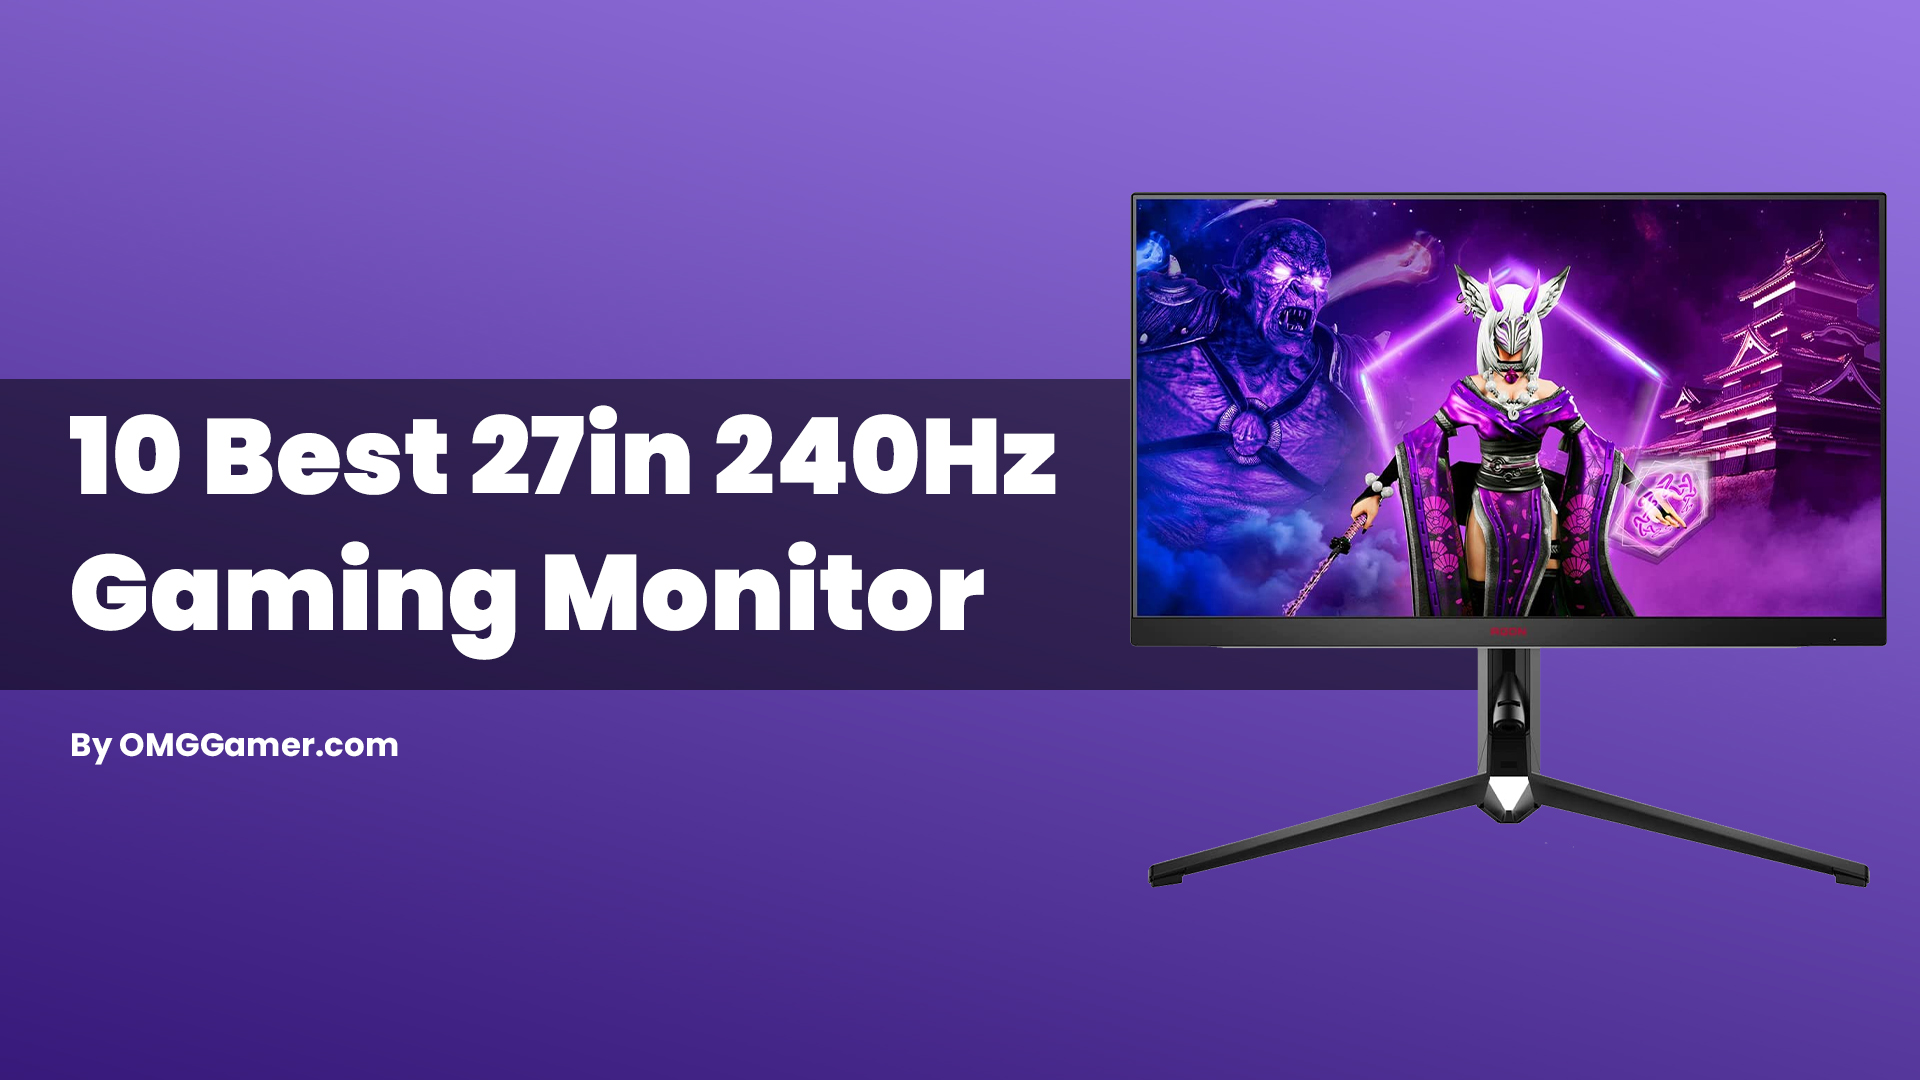 Best 27in 240Hz Gaming Monitor [Gamers Choice]